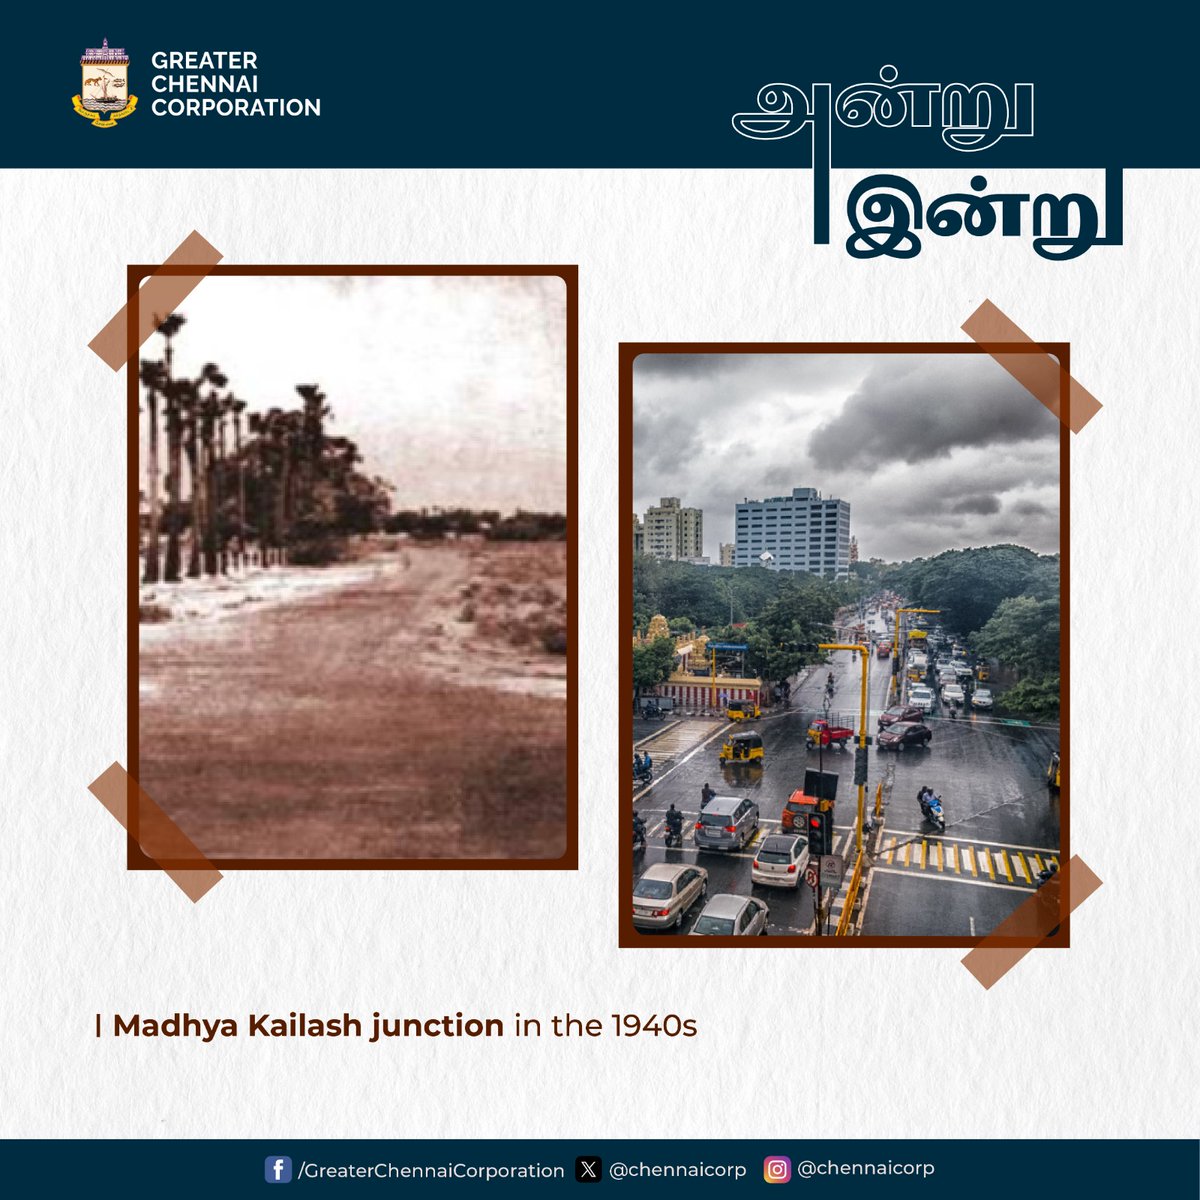 Then vs Now: Comparing Madhya Kailash junction then in the 1940s to now, witness the remarkable transformation over the decades. #ChennaiCorporation #HeretoServe